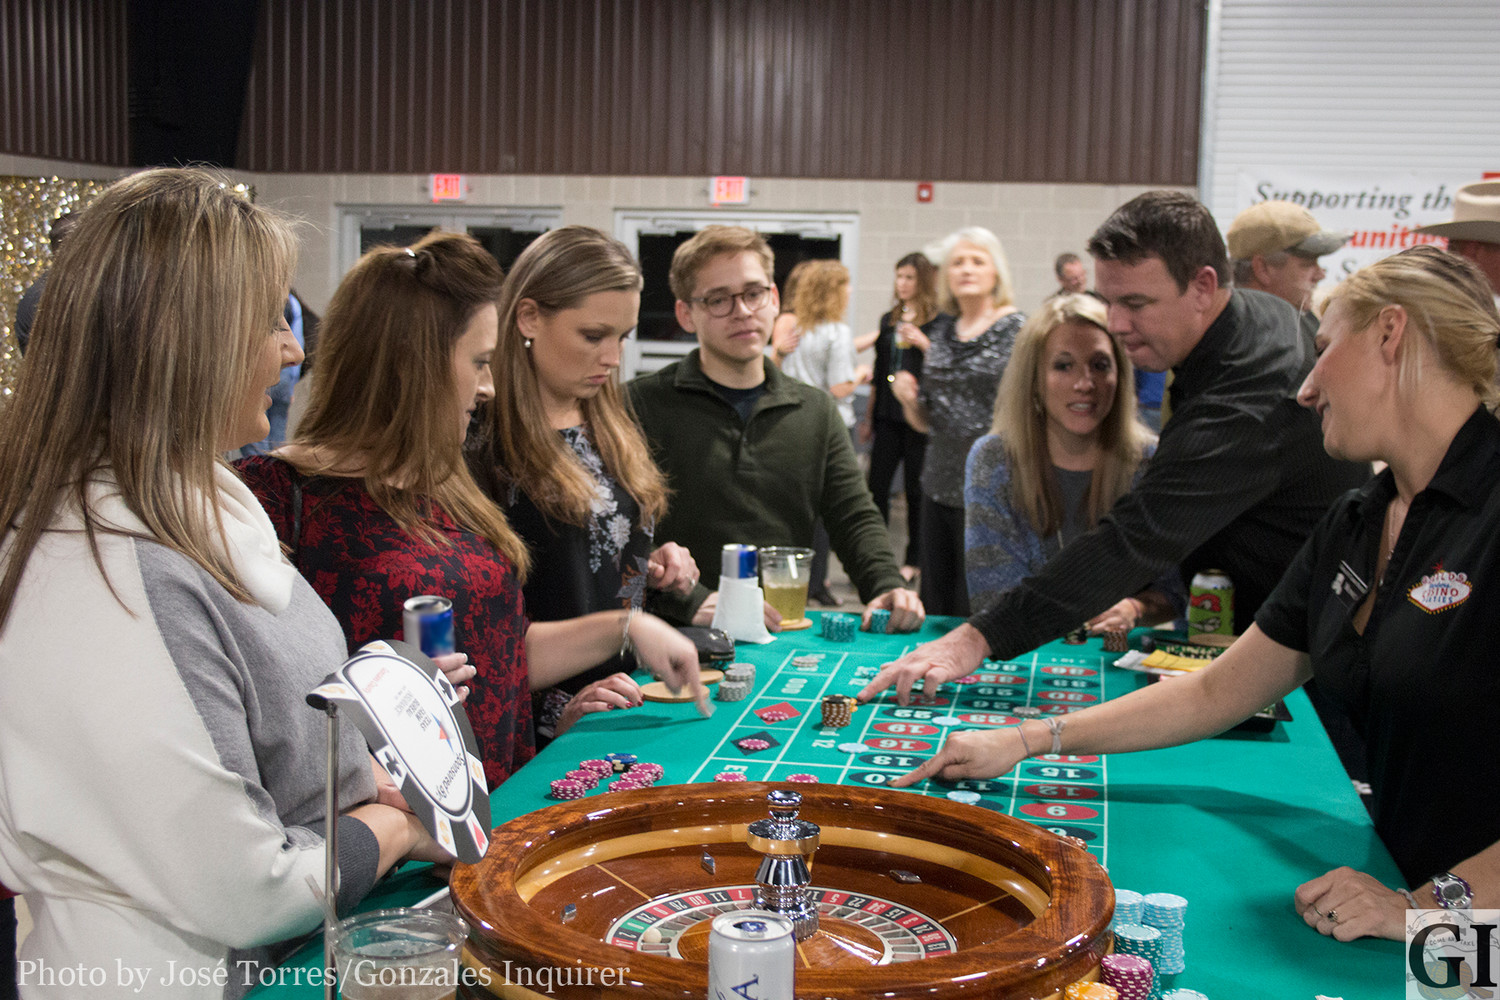 Casino Night 2018 | The Gonzales Inquirer